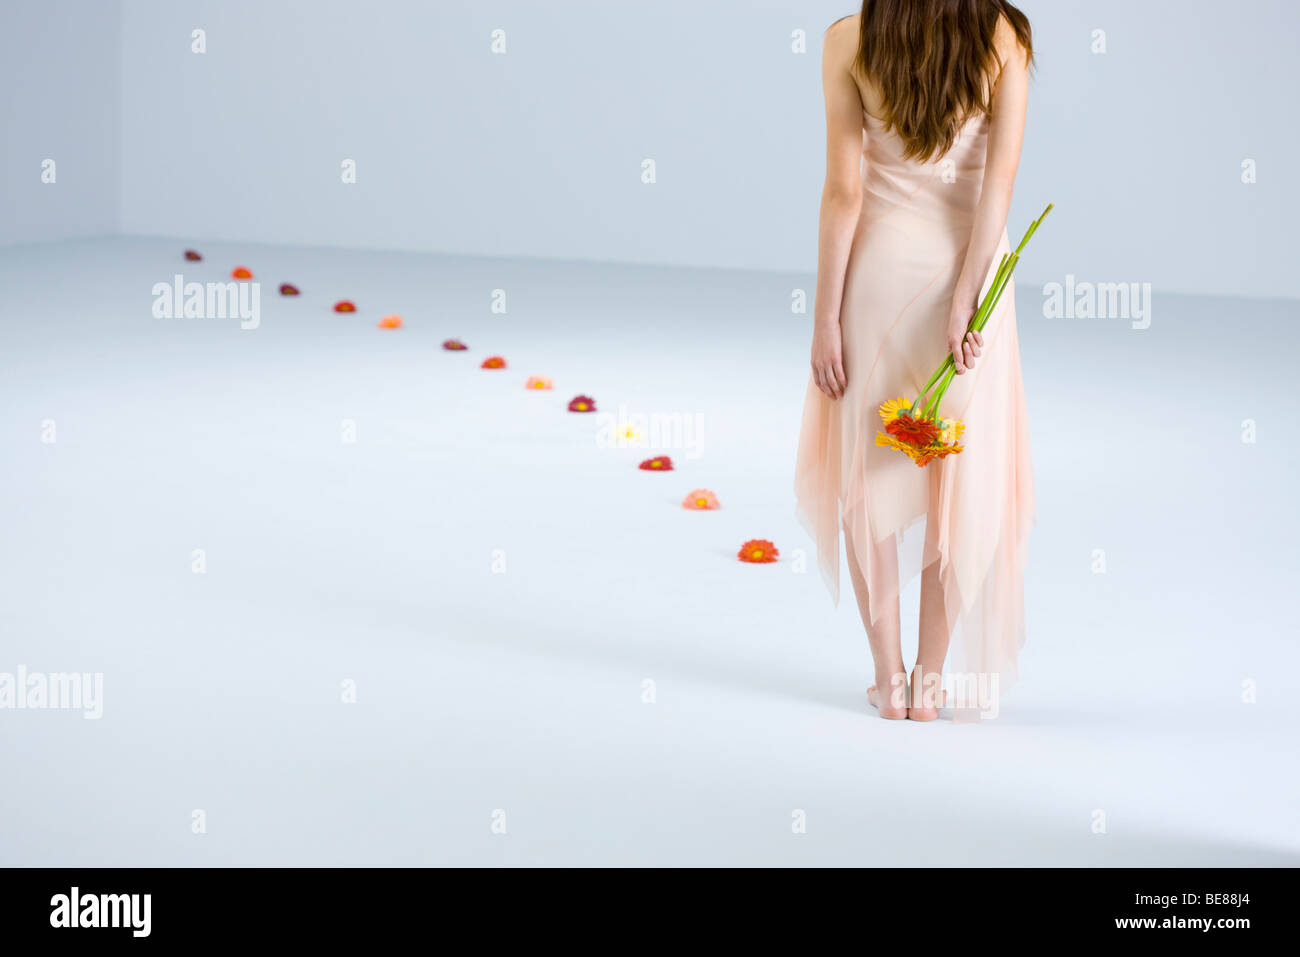 Woman holding bouquet behind back, path of flowers leading away from her, rear view Stock Photo